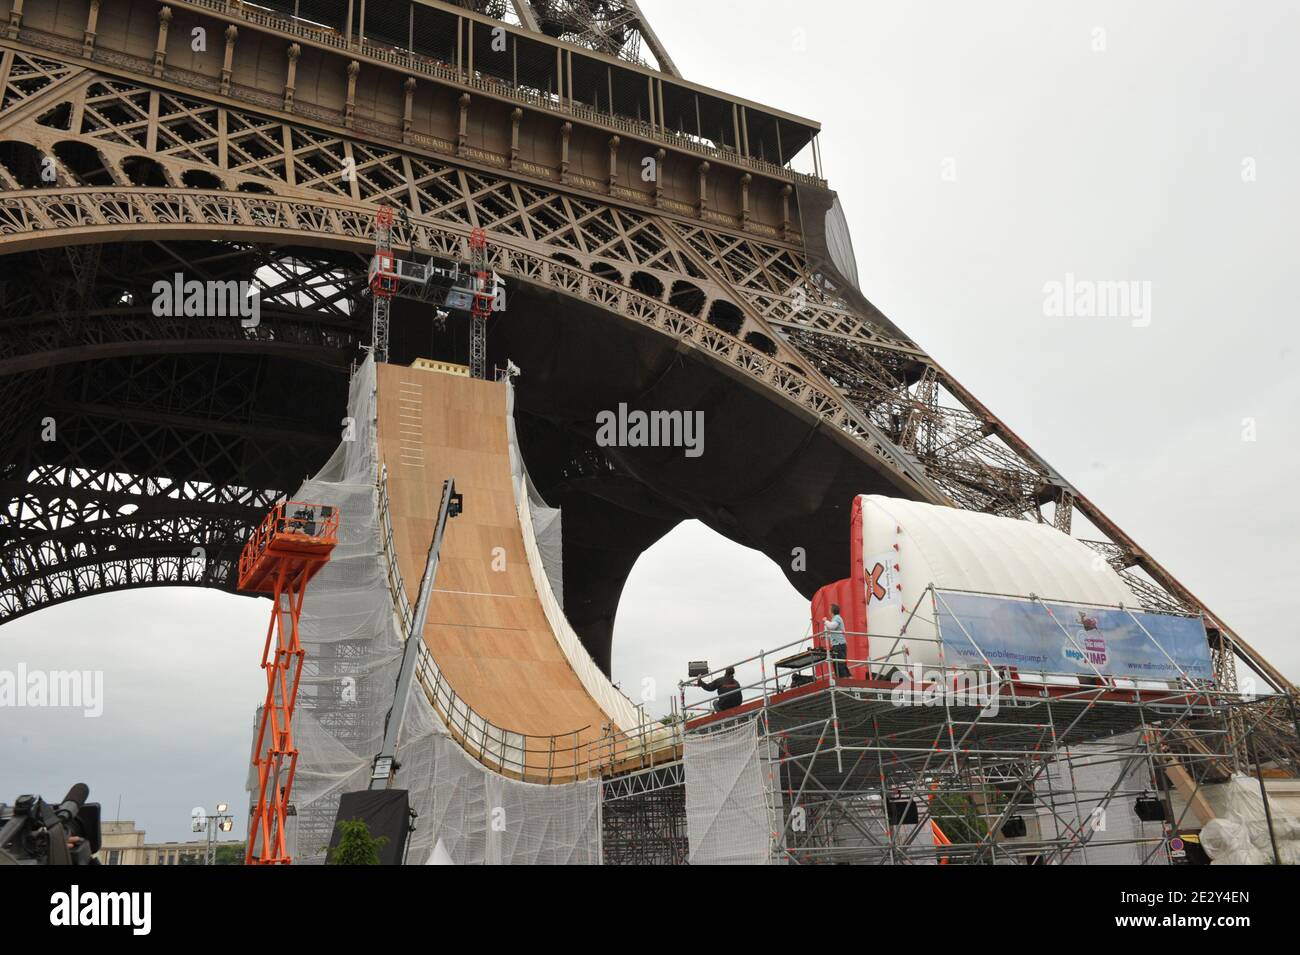 French world roller champion Taig Khris jumps 30 meter halfpipe built under  the 'Tour Eiffel', in Paris, France, on May 29, 2010. He performs the world  record of 10 meter free jump